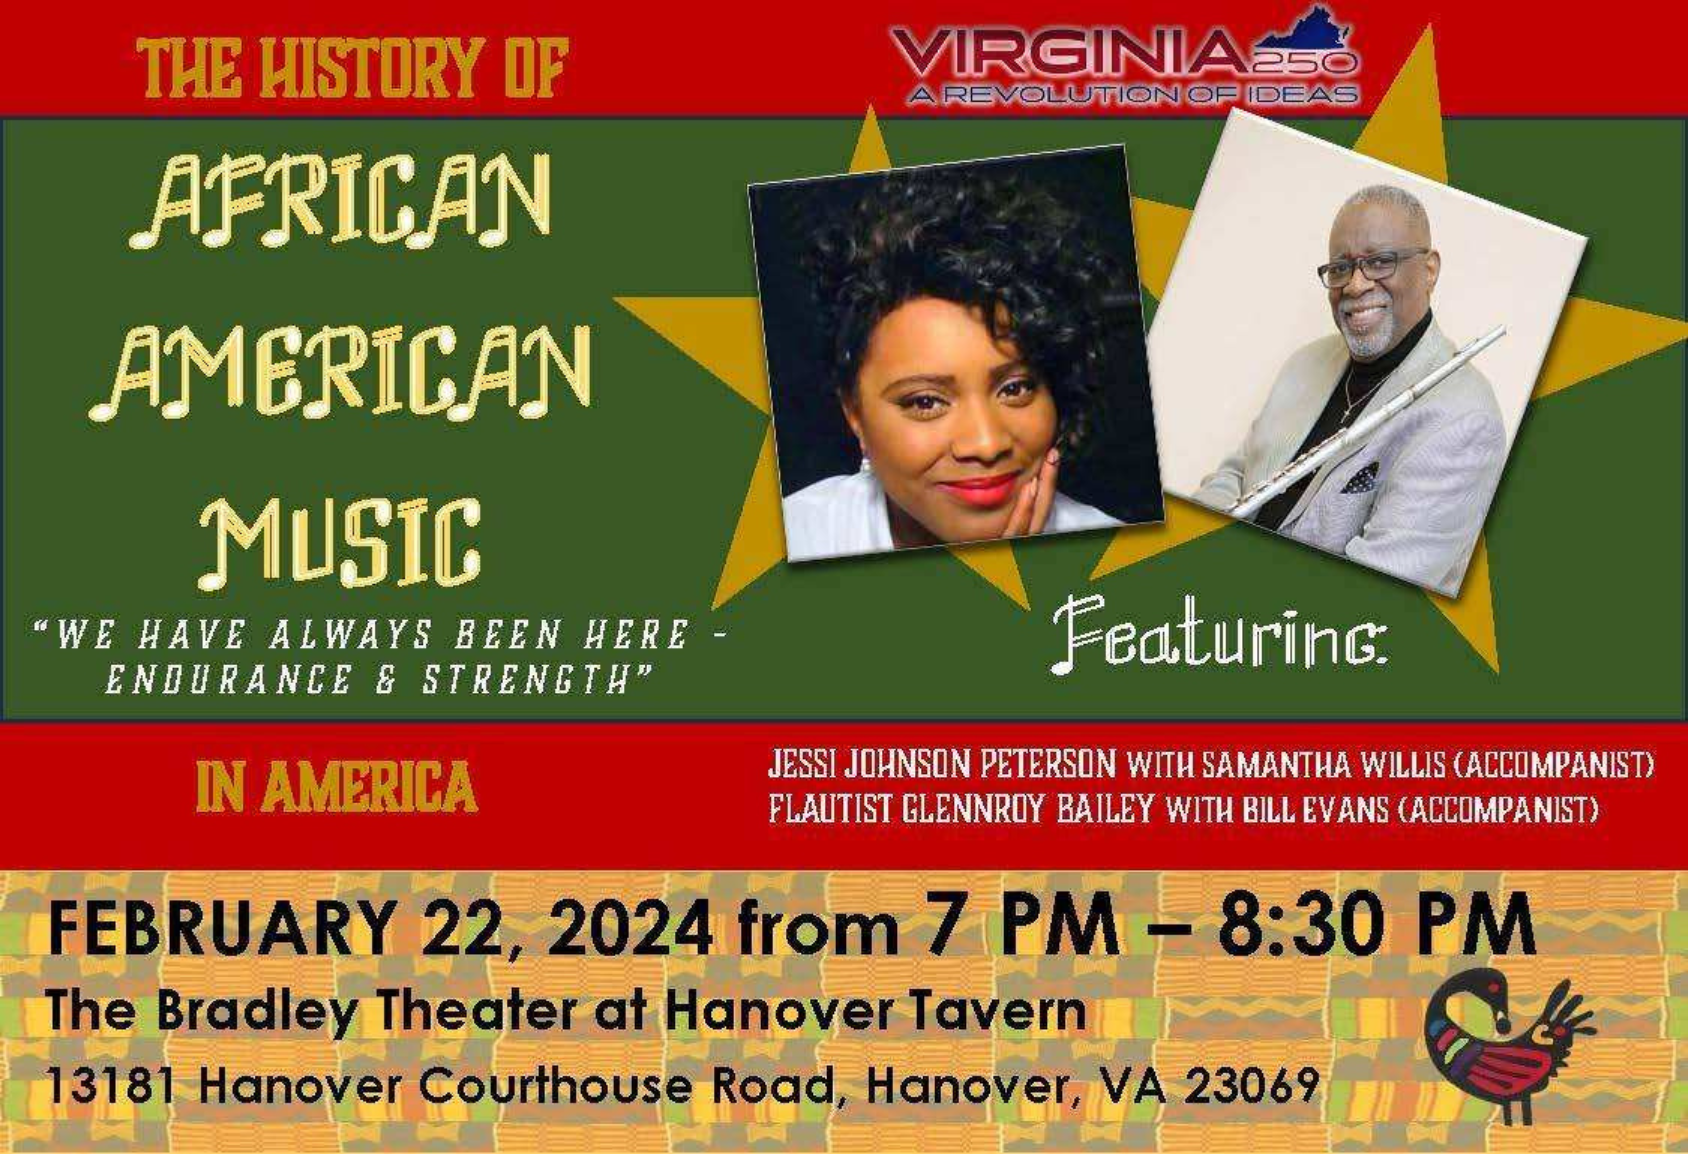 The History of African American Music in America